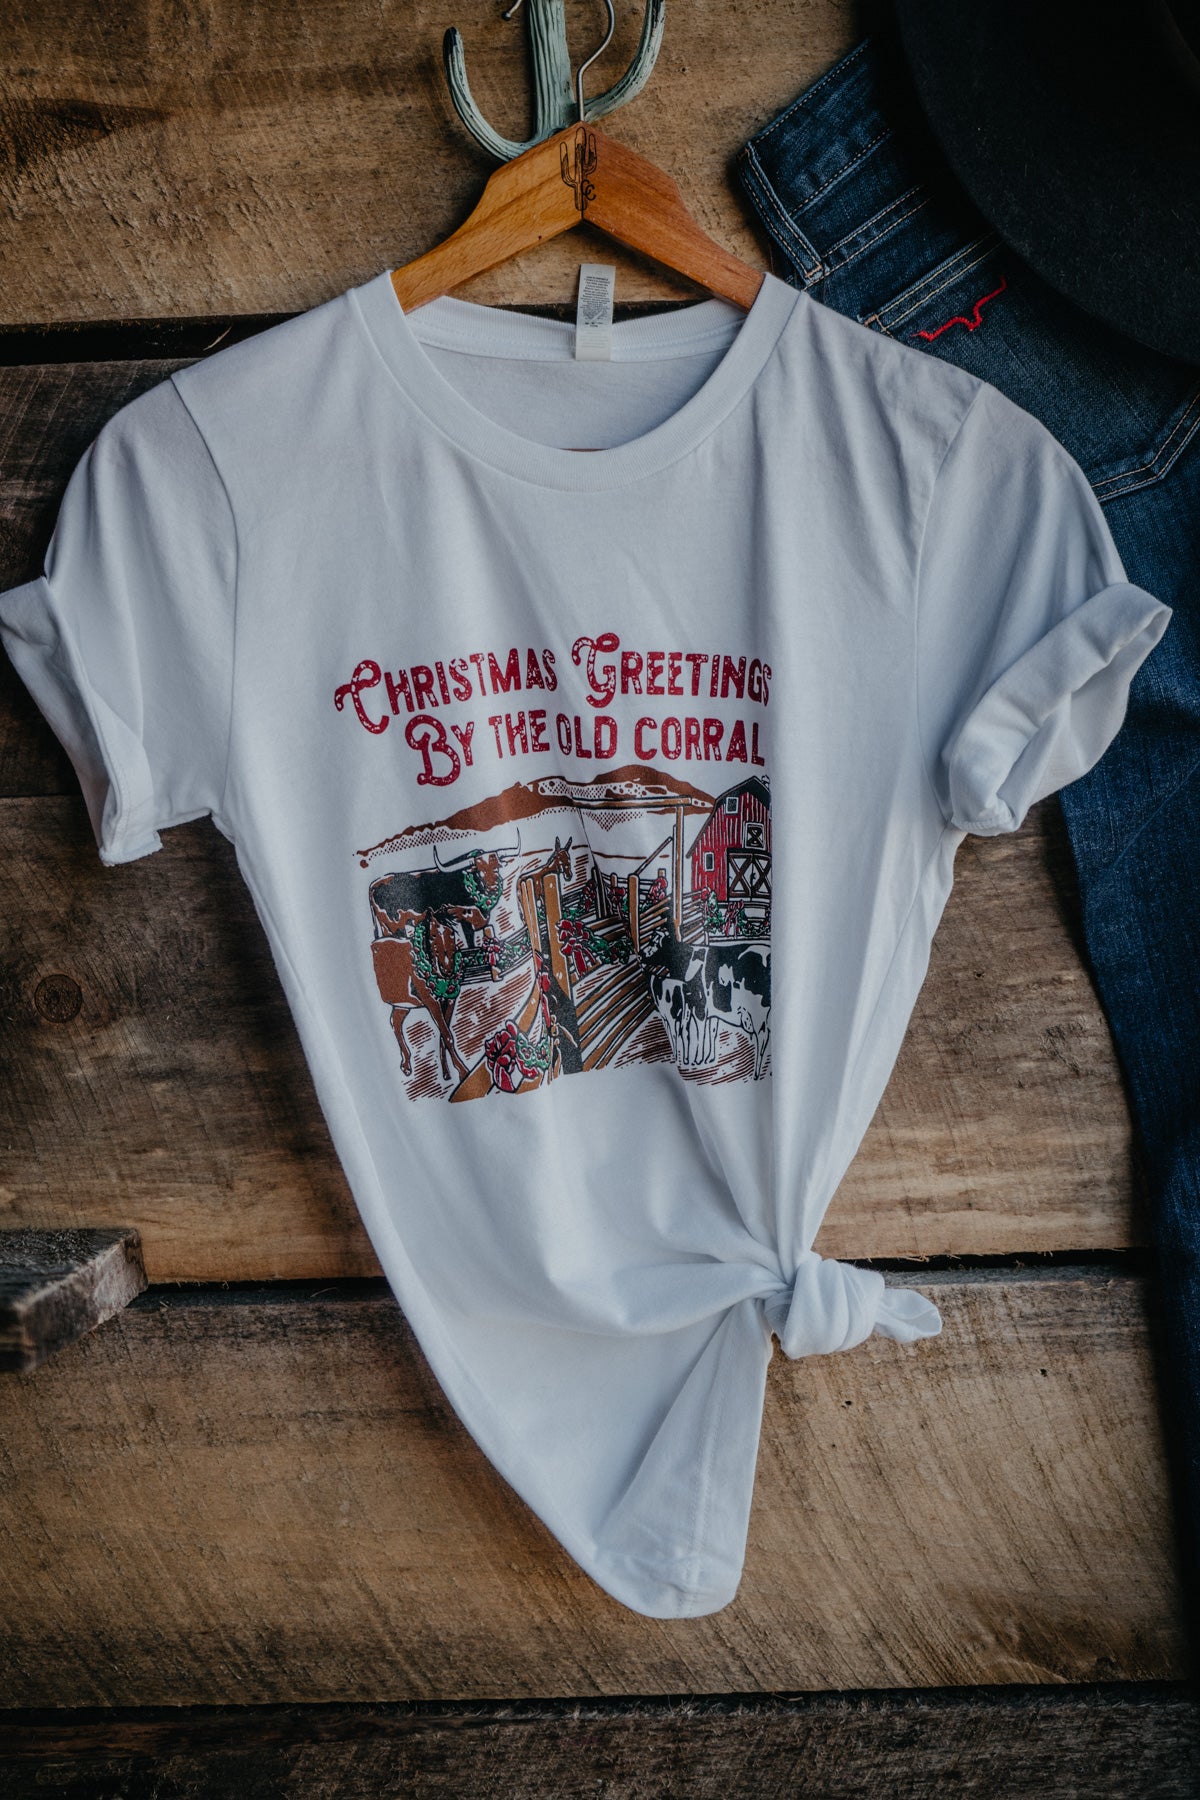 "Christmas Greetings by the Old Corral" CC Exclusive Graphic T